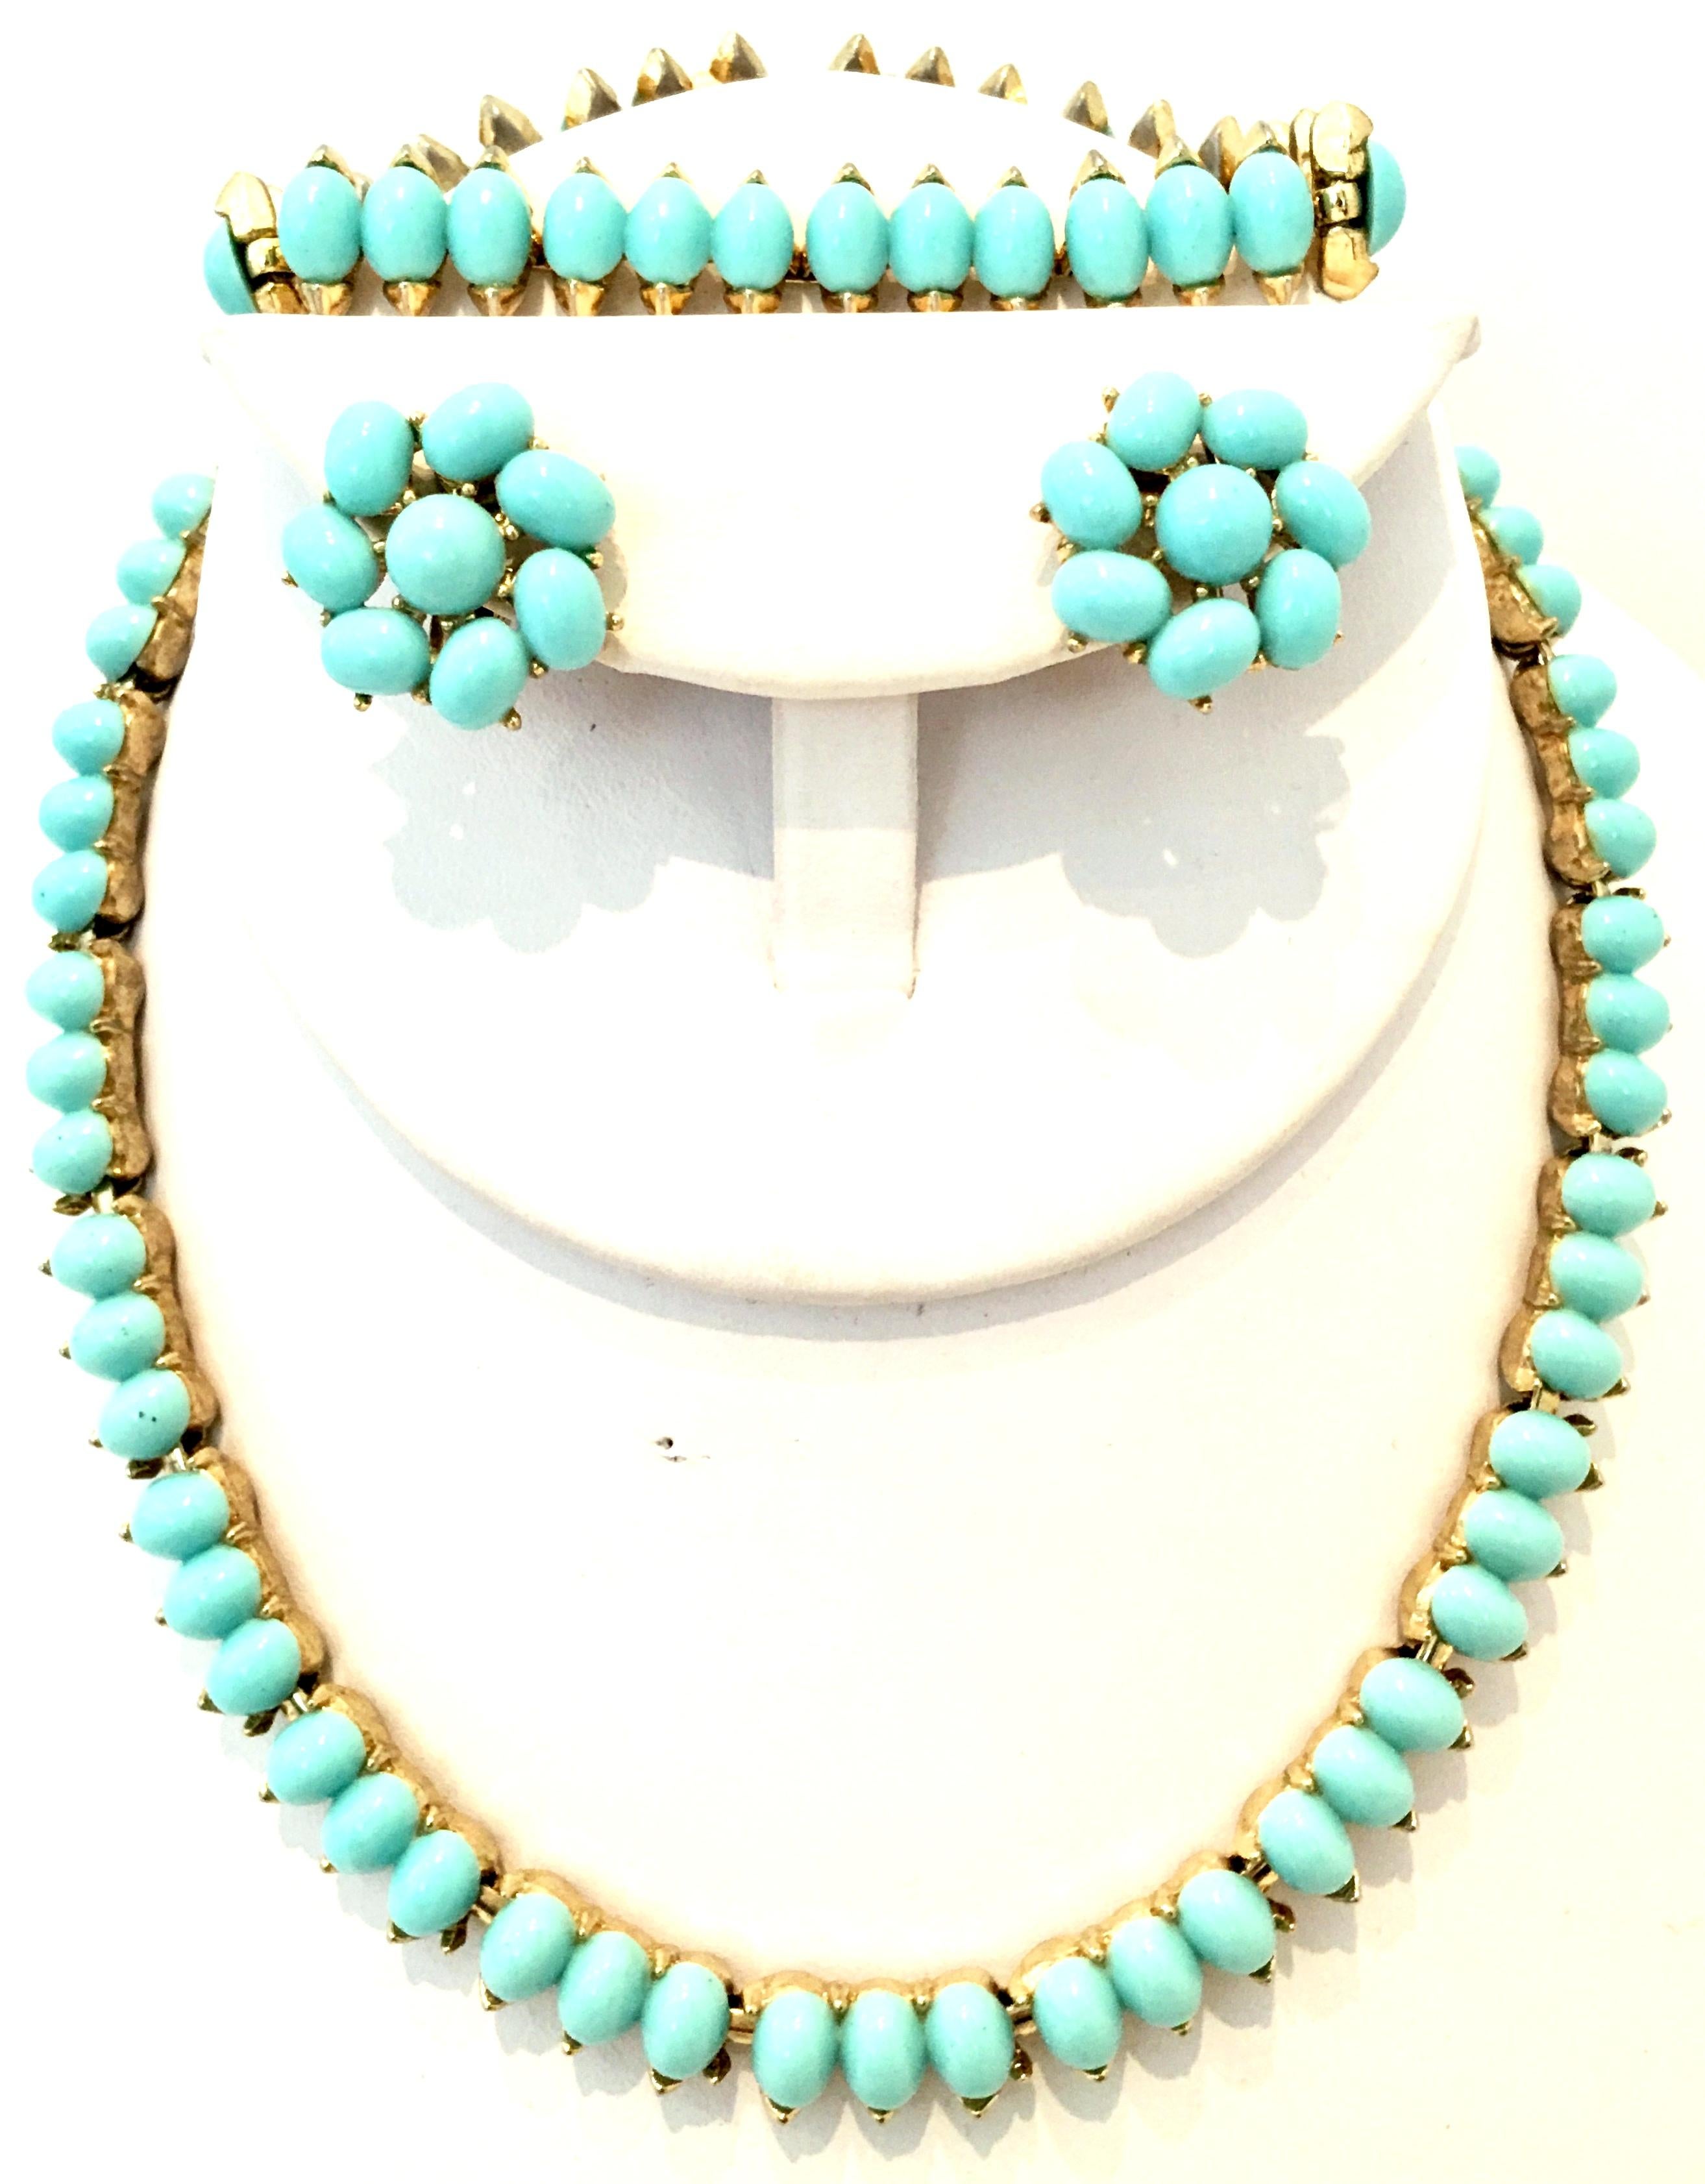 Mid-20th Century Gold Plate & Faux Turquoise Full Demi Parure Set Of Four Pieces, Choker Style Necklace, Bracelet And Earrings By, Trifari. This finely crafted and highly coveted, collectible four piece Demi Parure features a choker style